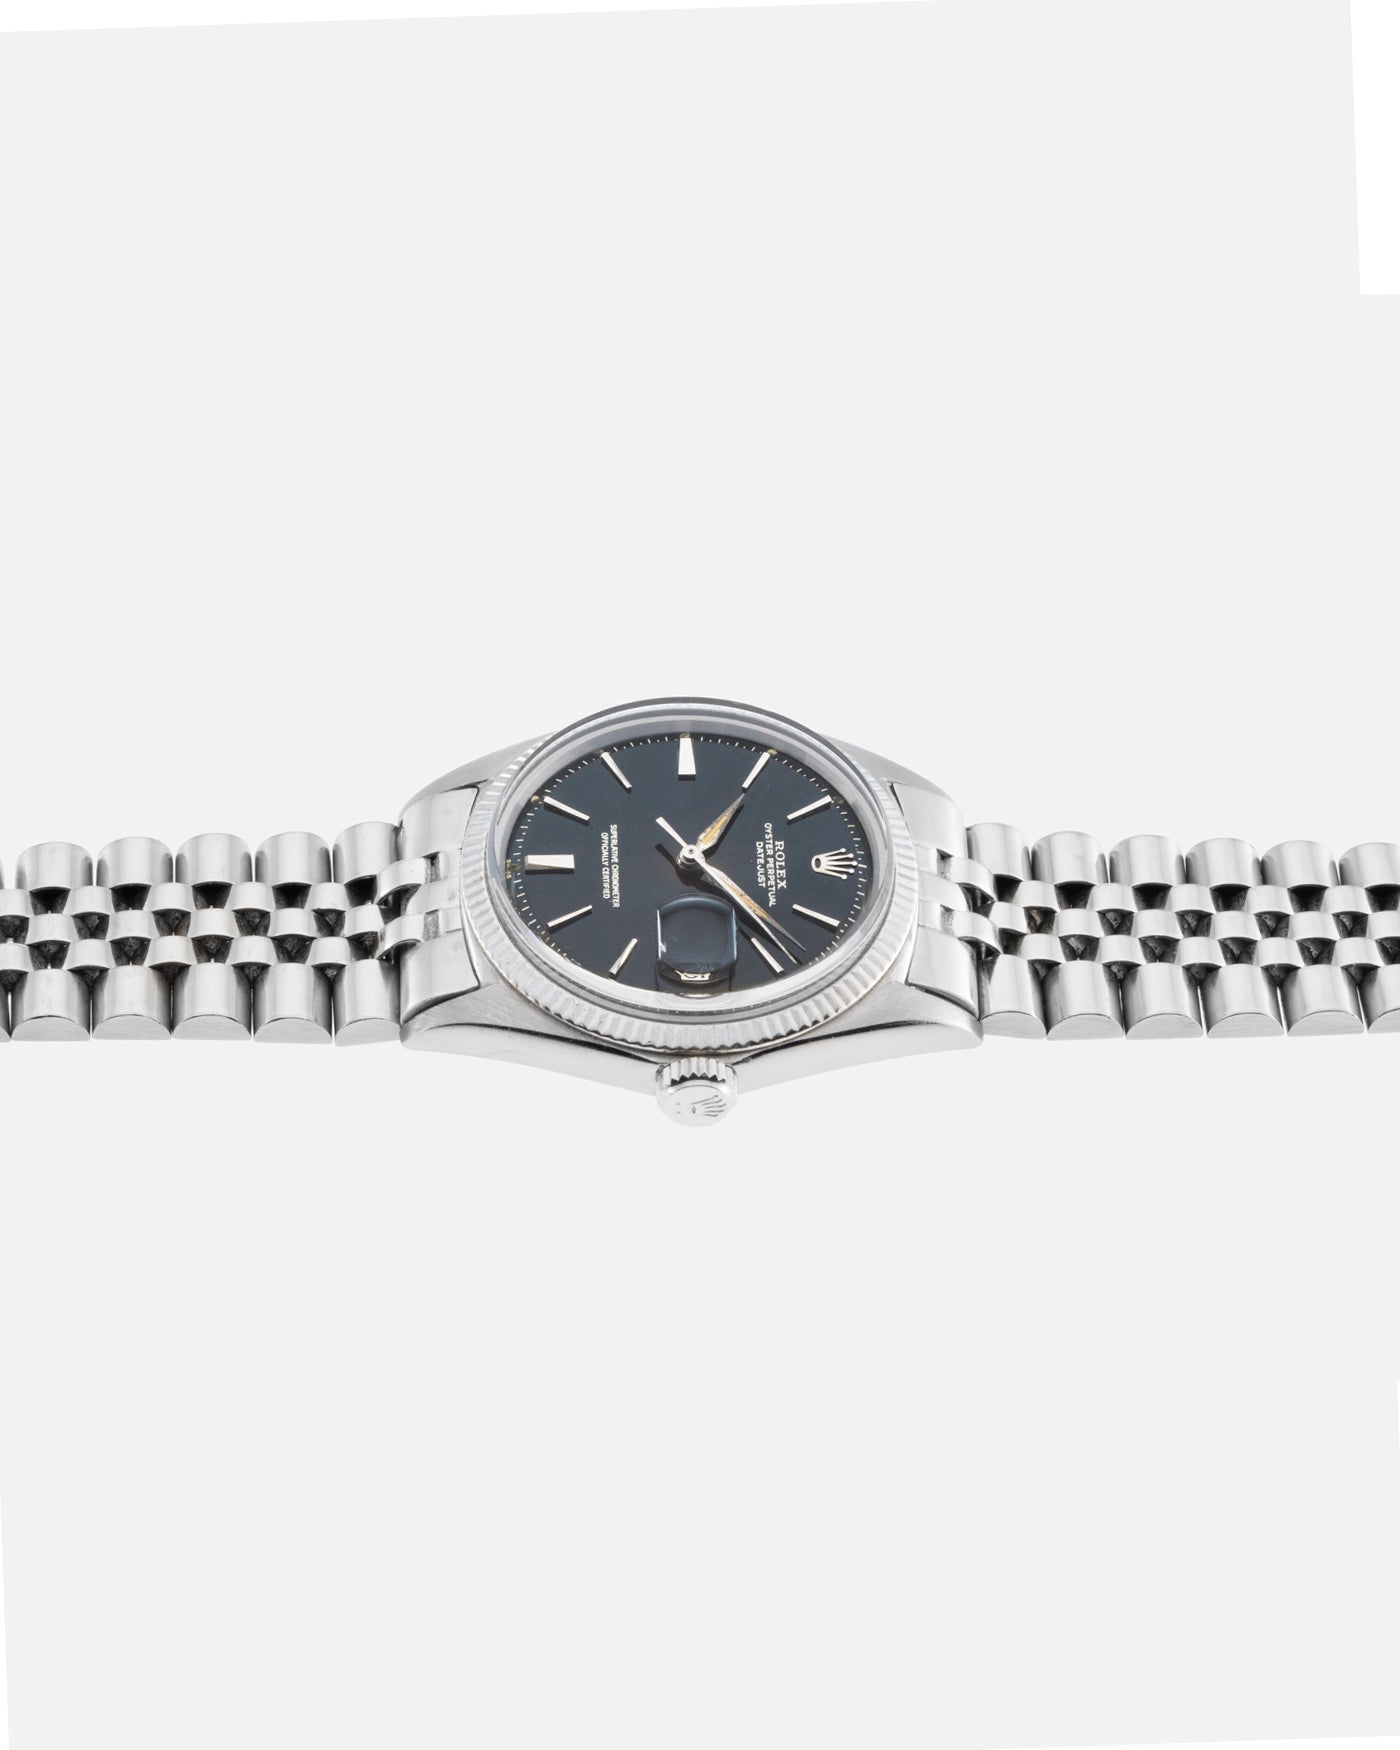 Rolex Datejust 1601 White Gold 'Tropical'